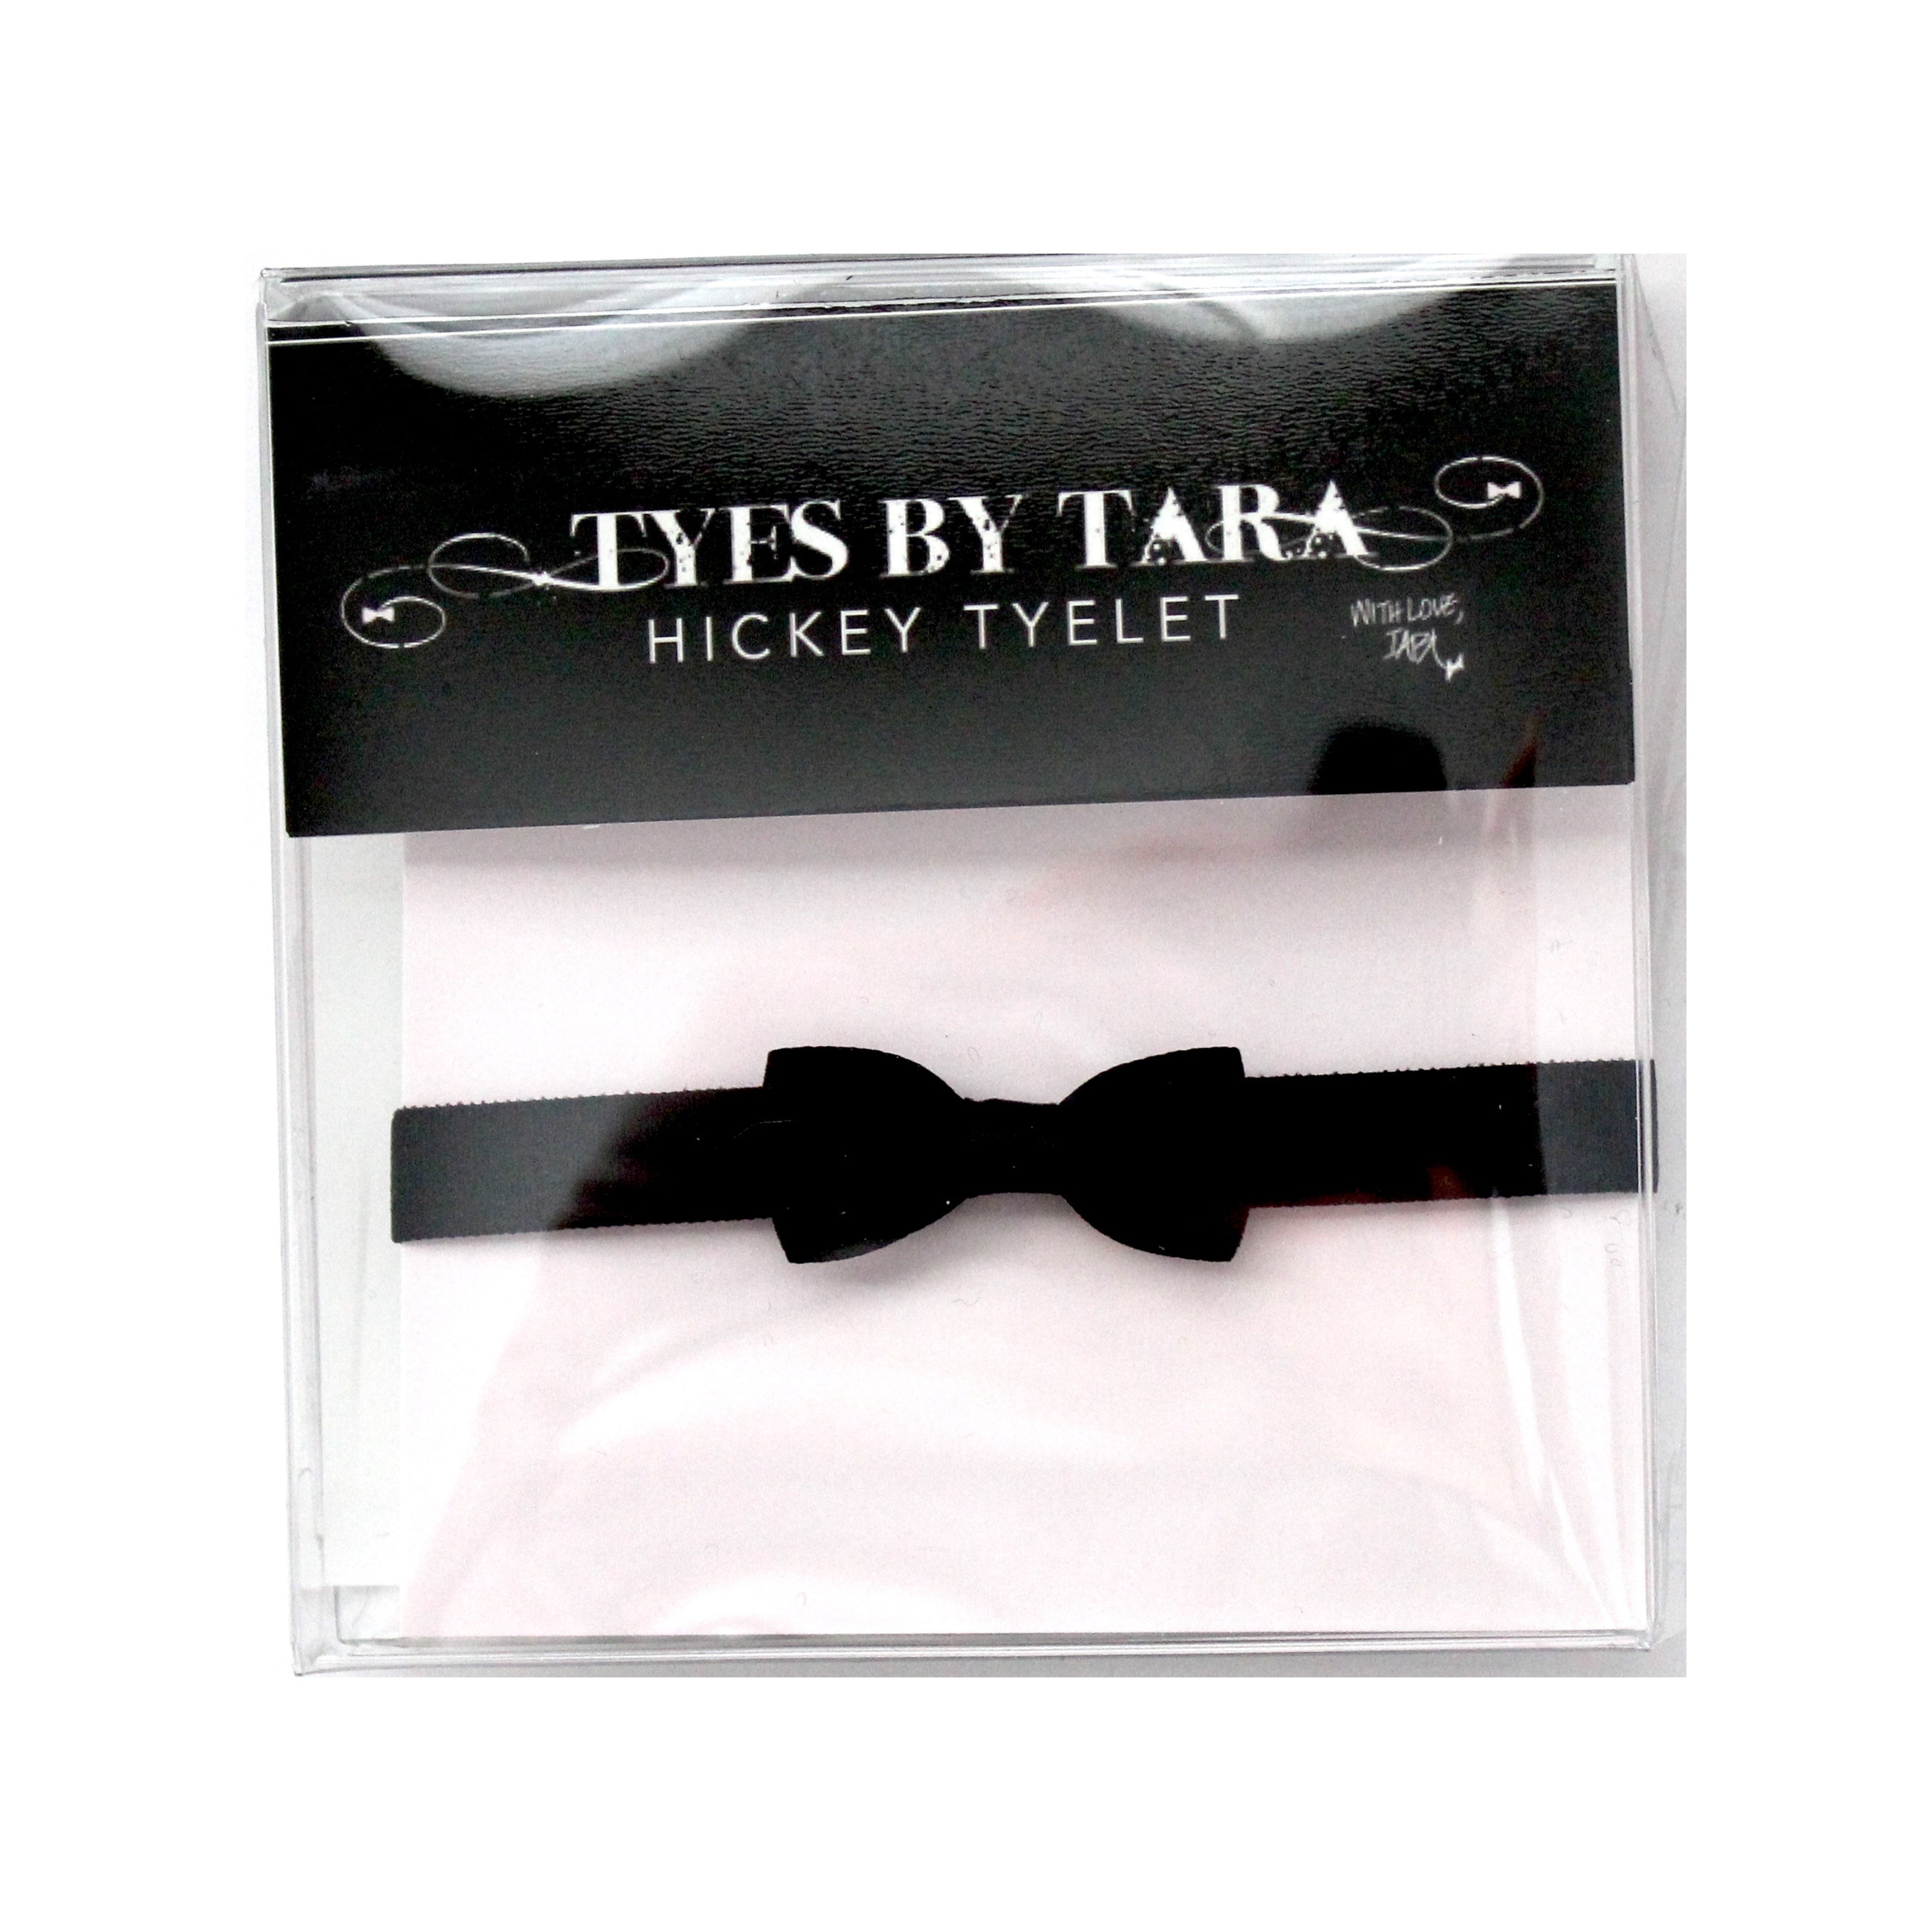 Hickey Black Bow Bracelet in Black and Pink Box